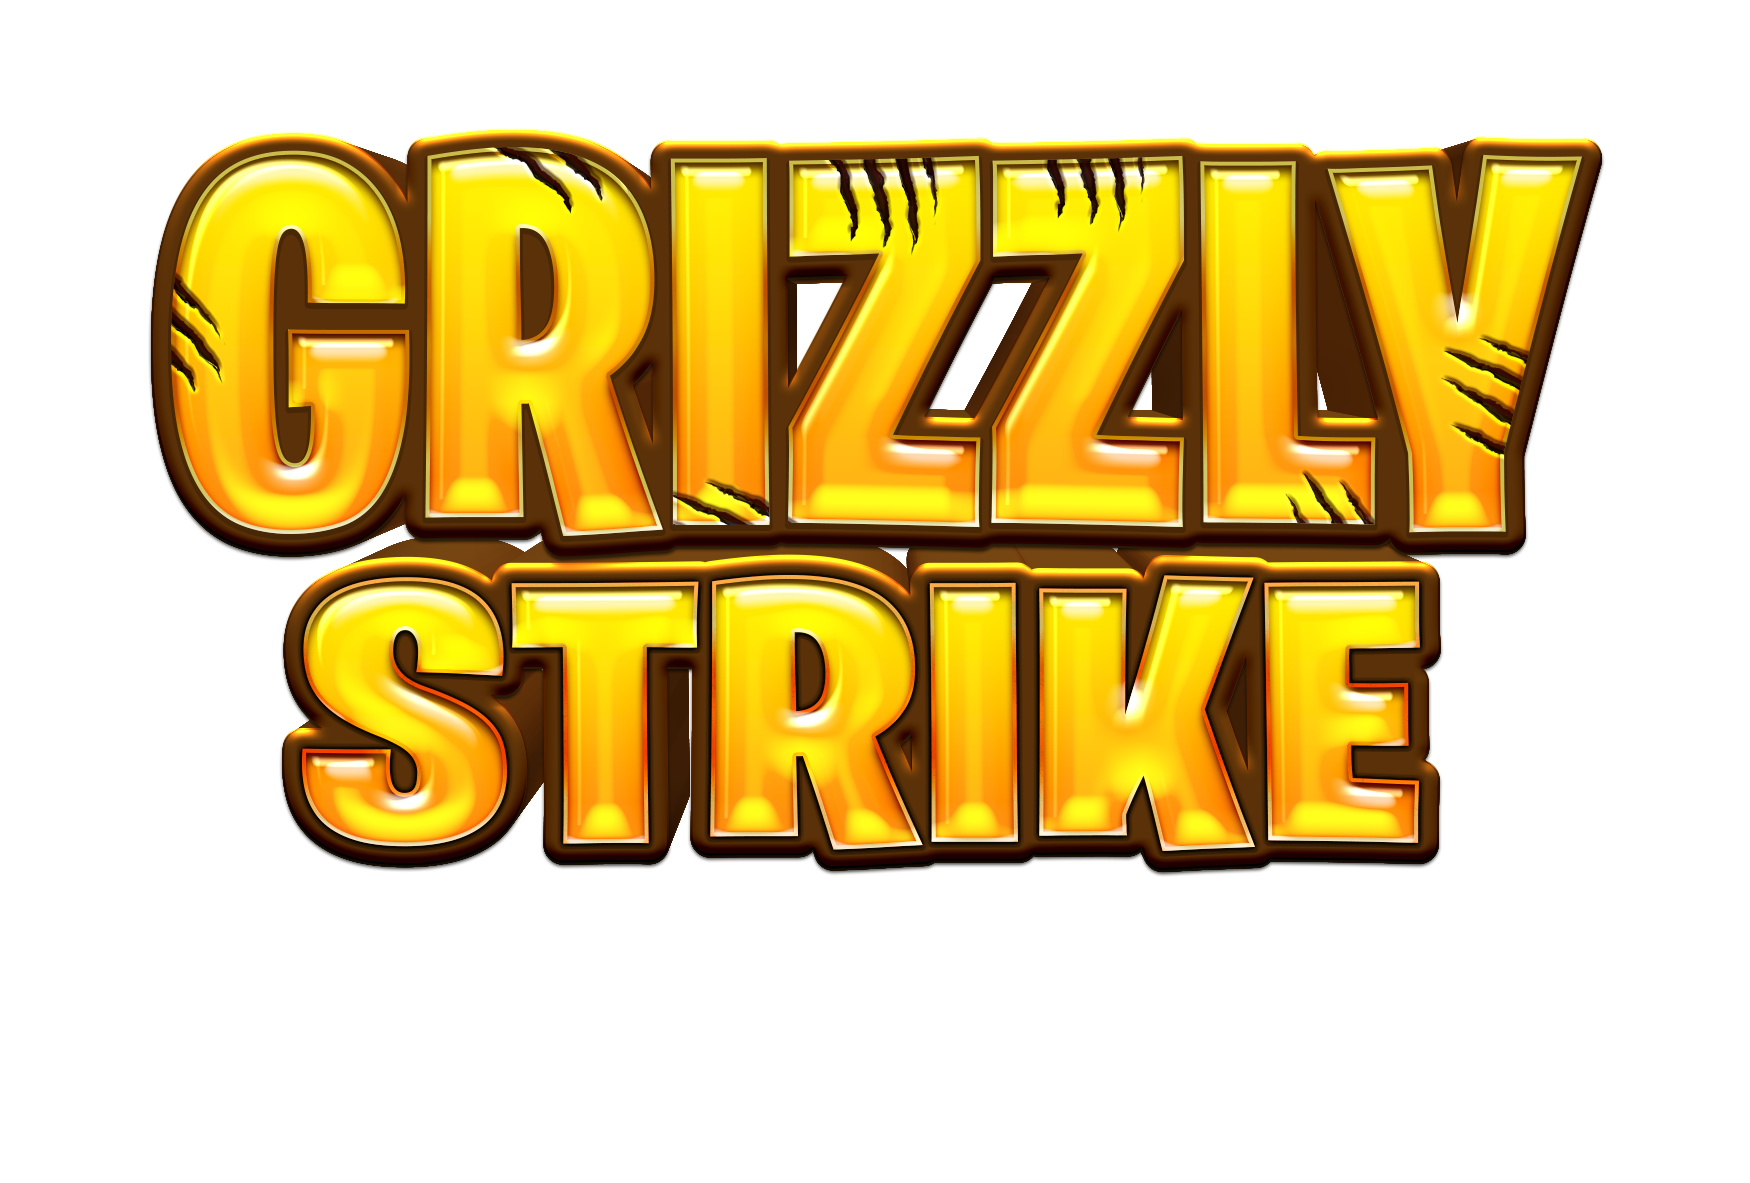 grizzly-strike-hold-and-win-logo.png